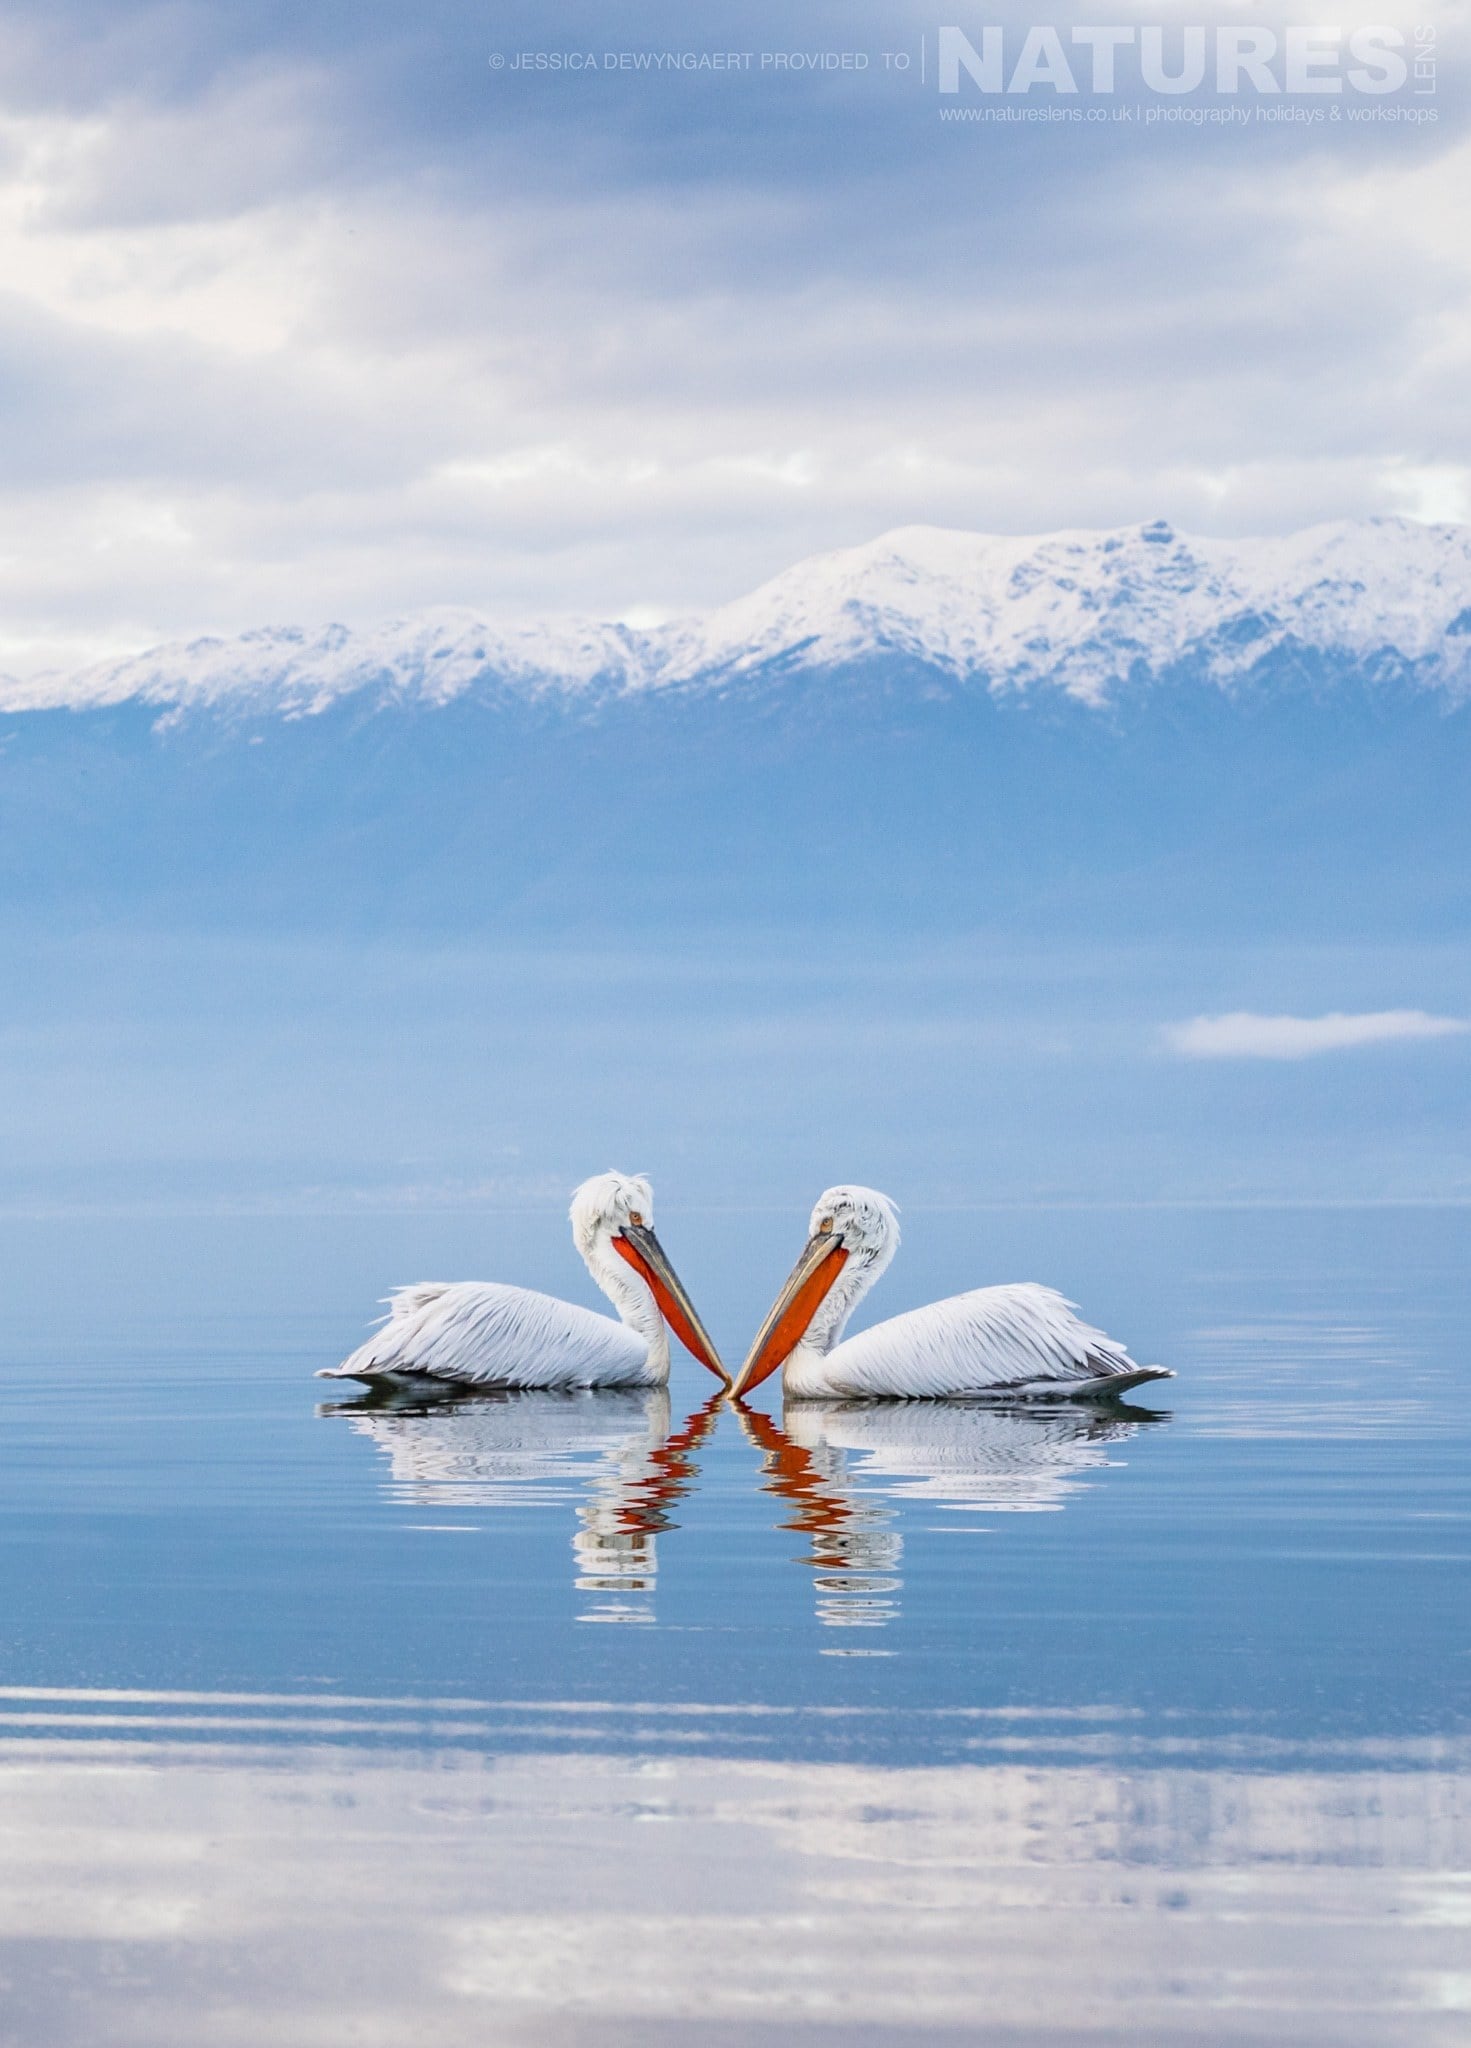 a pair of dalmatian pelicans with their beaks just touching the water an image captured during a natureslens dalmatian pelicans of greece photography holiday